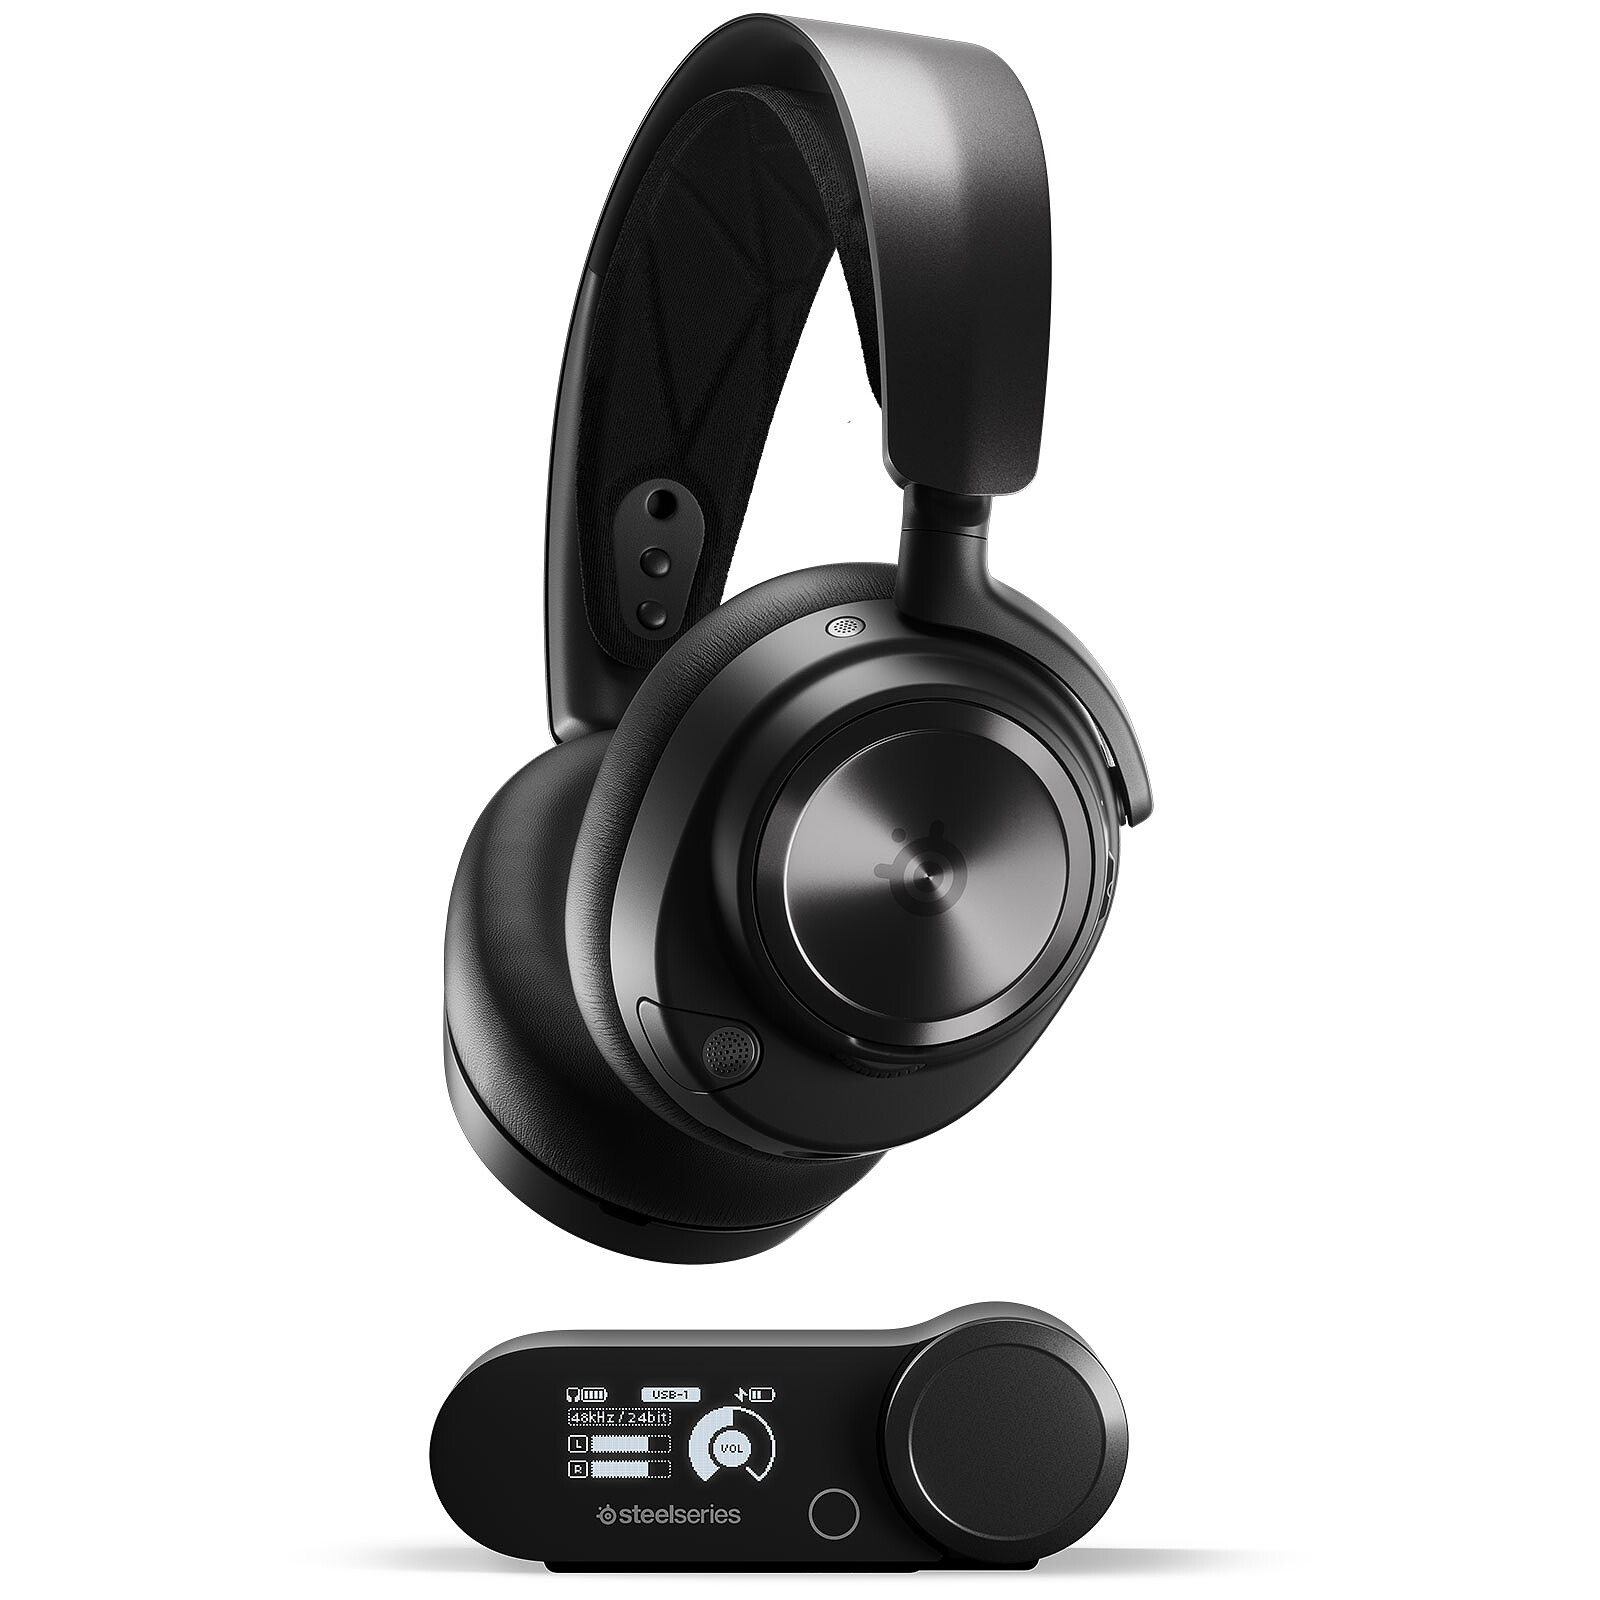 Casques, Auriculaire Stereo USB, VOL+VOL- Boutons